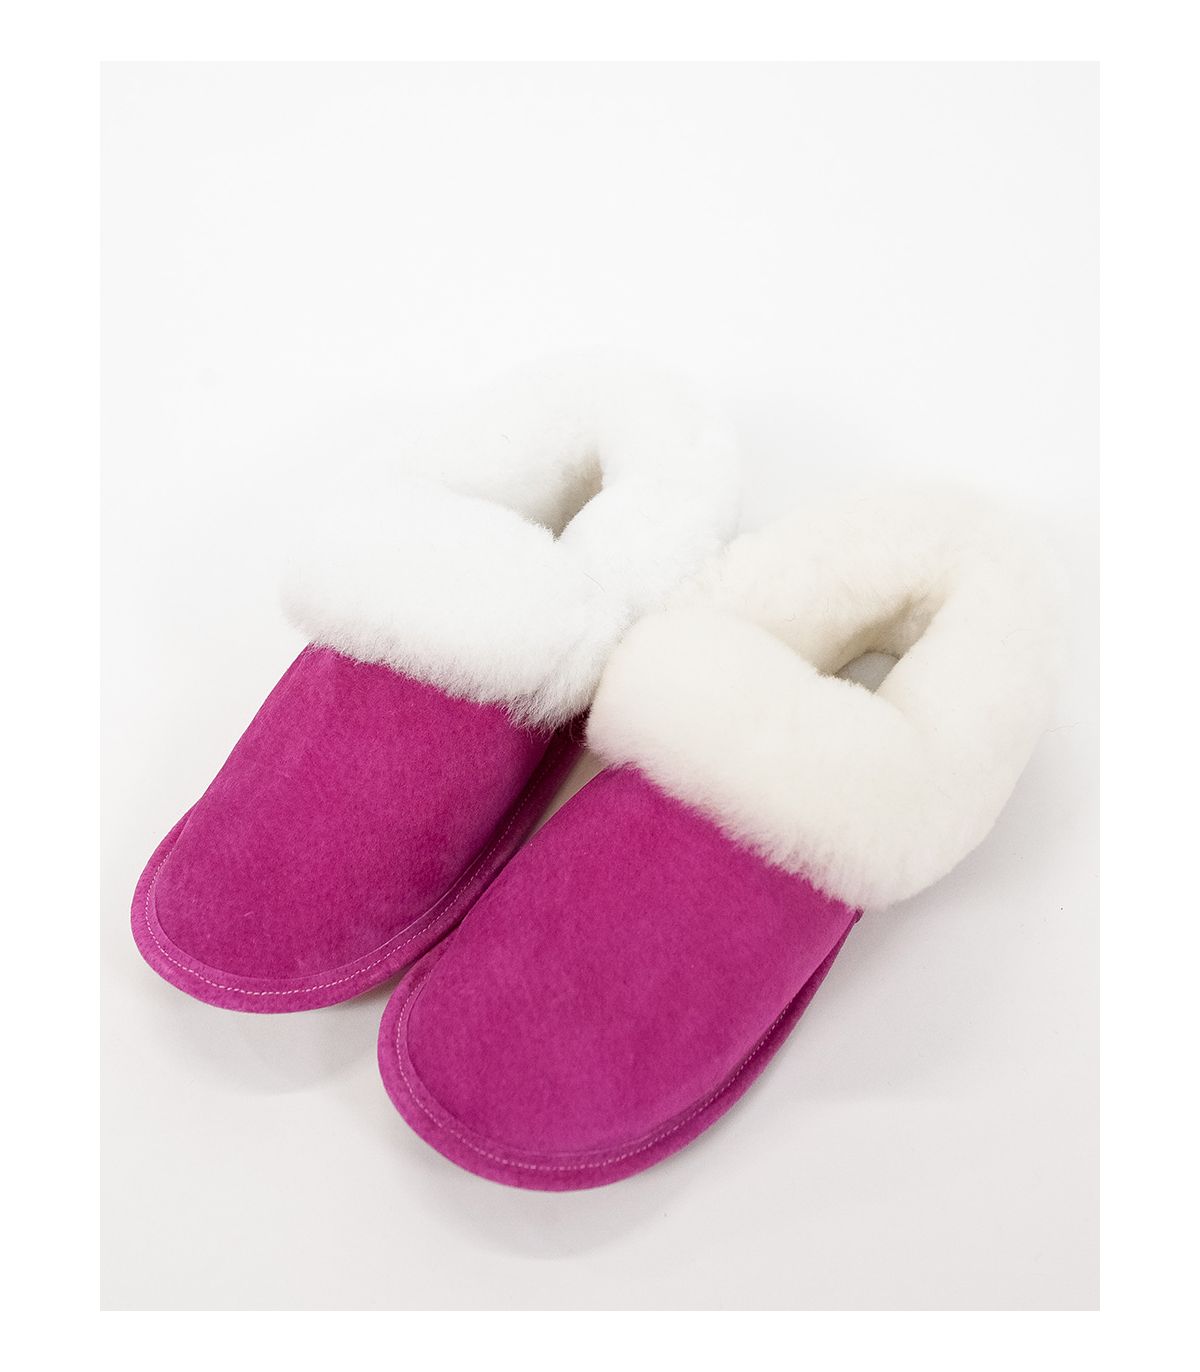 Pink Fur Slippers Real Fur Slippers Fluffy Slippers Winter 